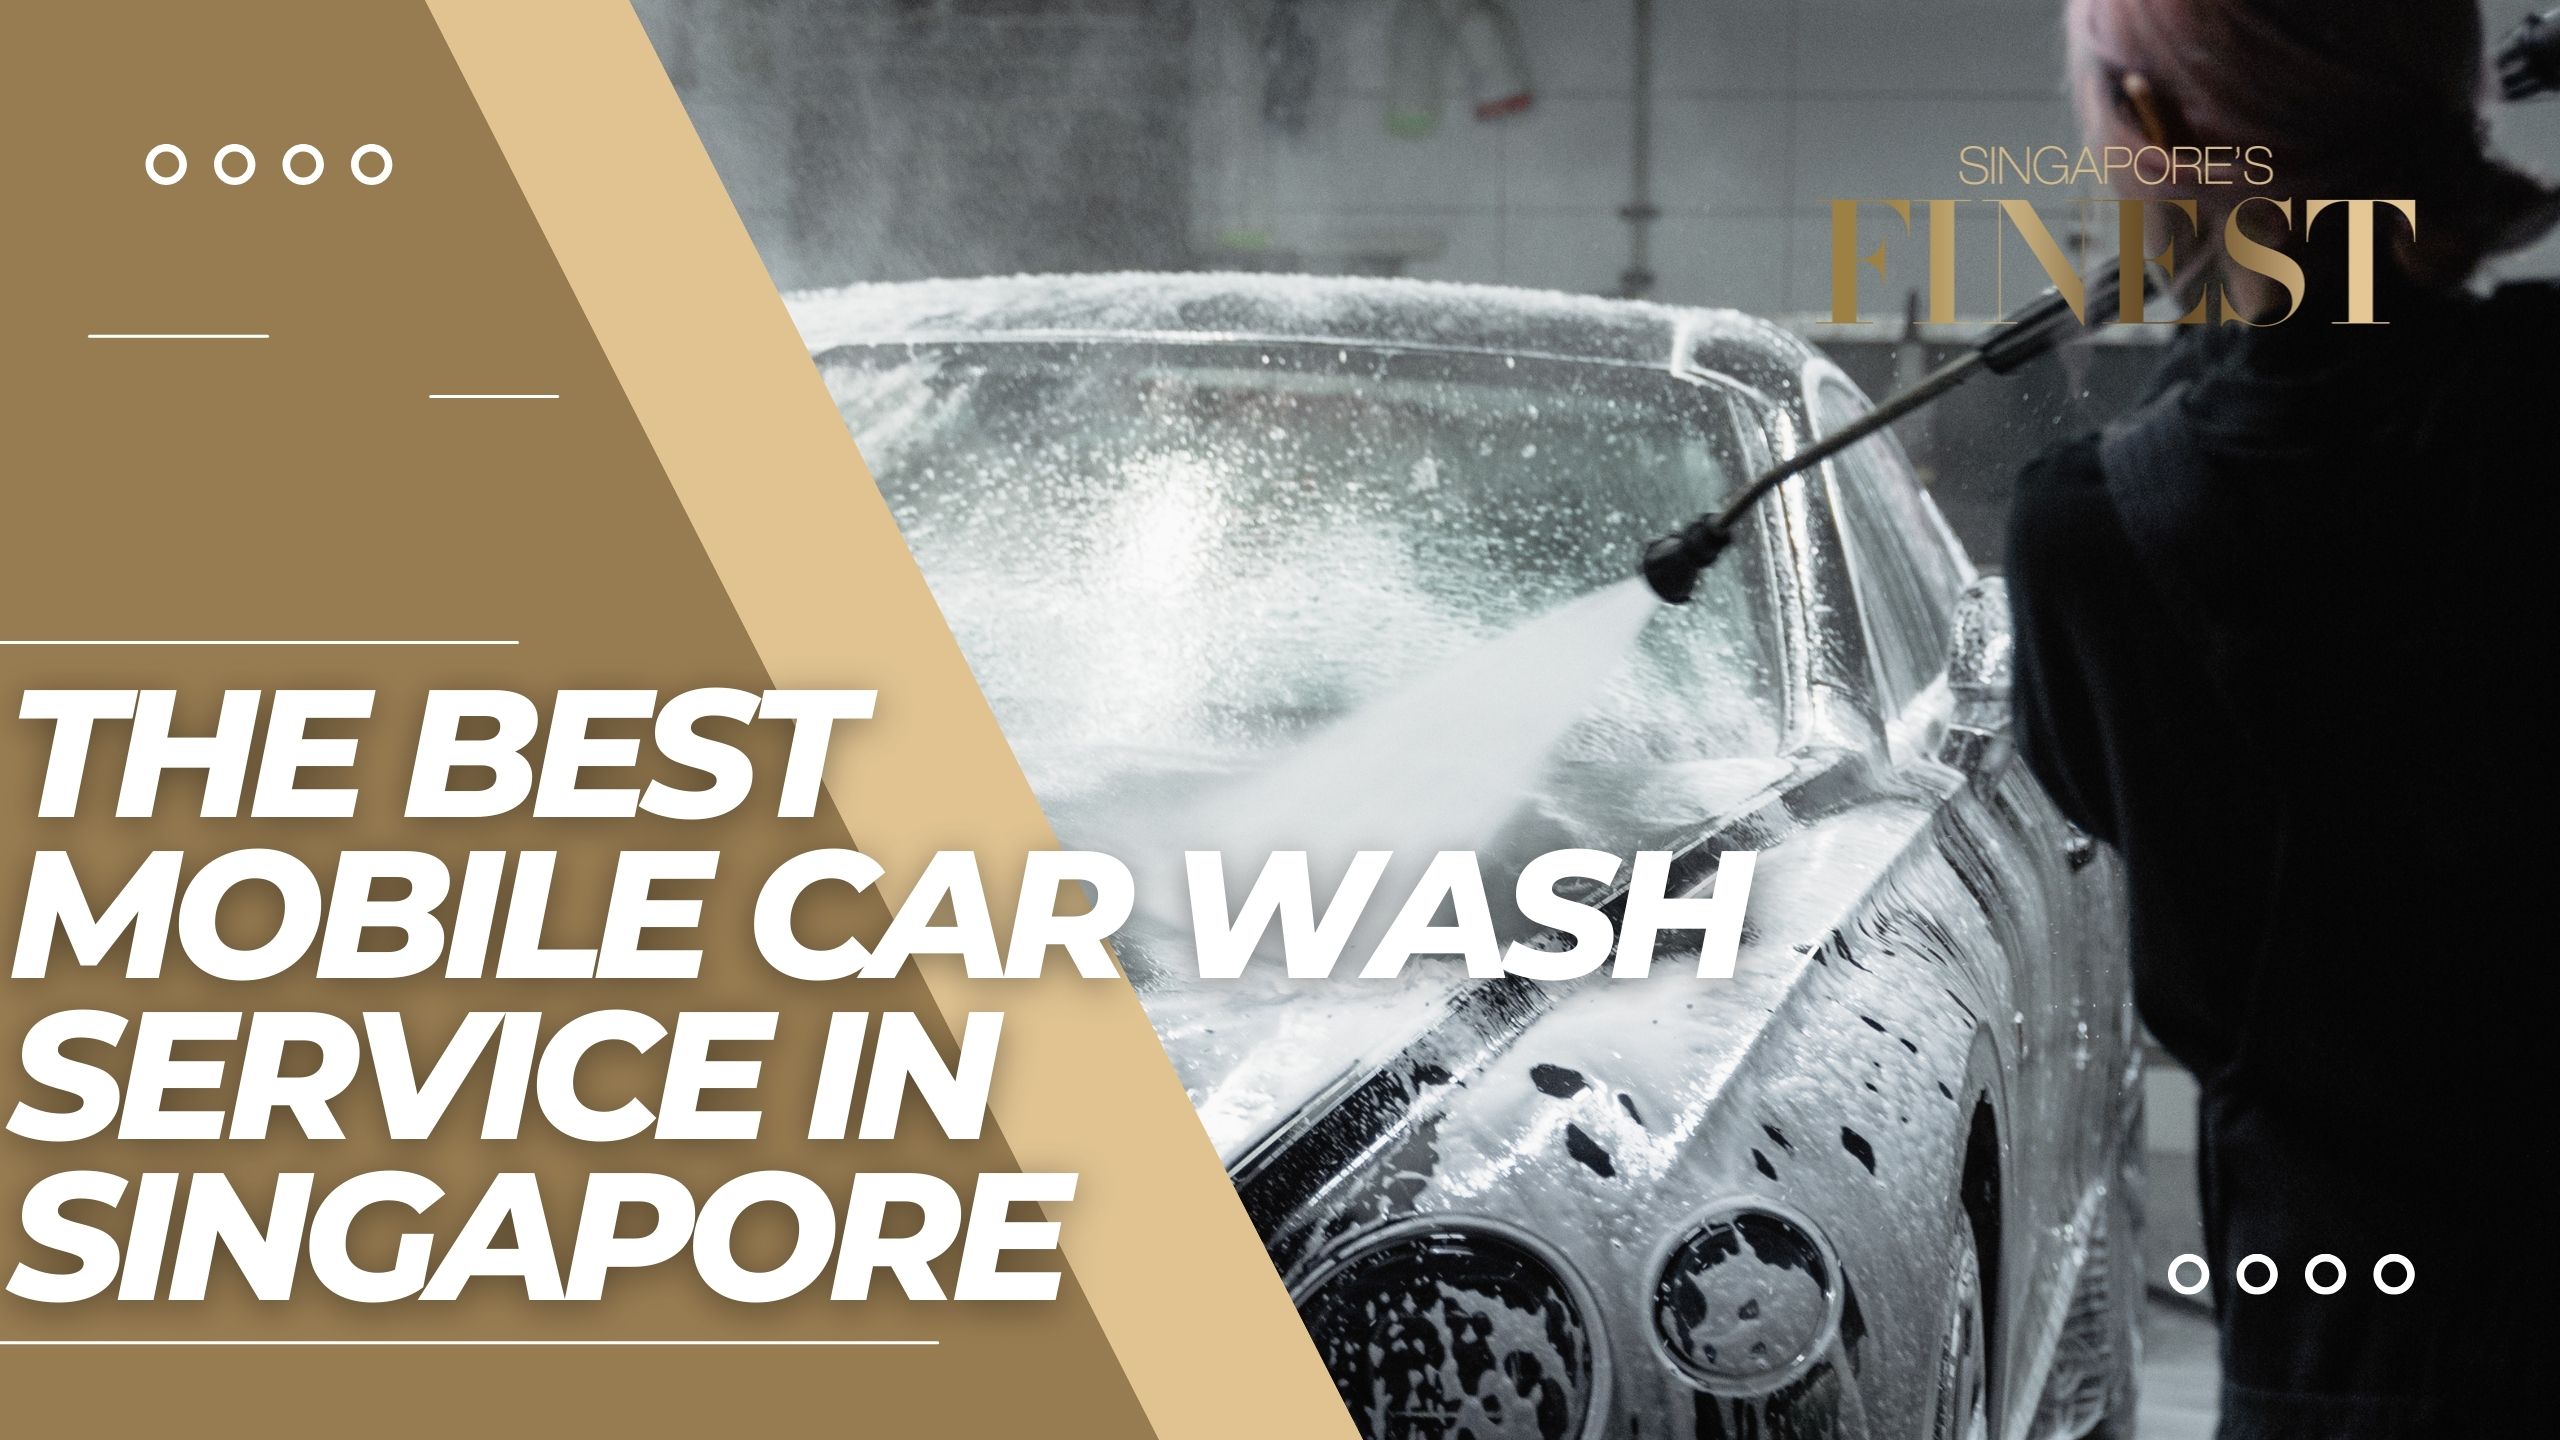 The Finest Mobile Car Wash Service in Singapore